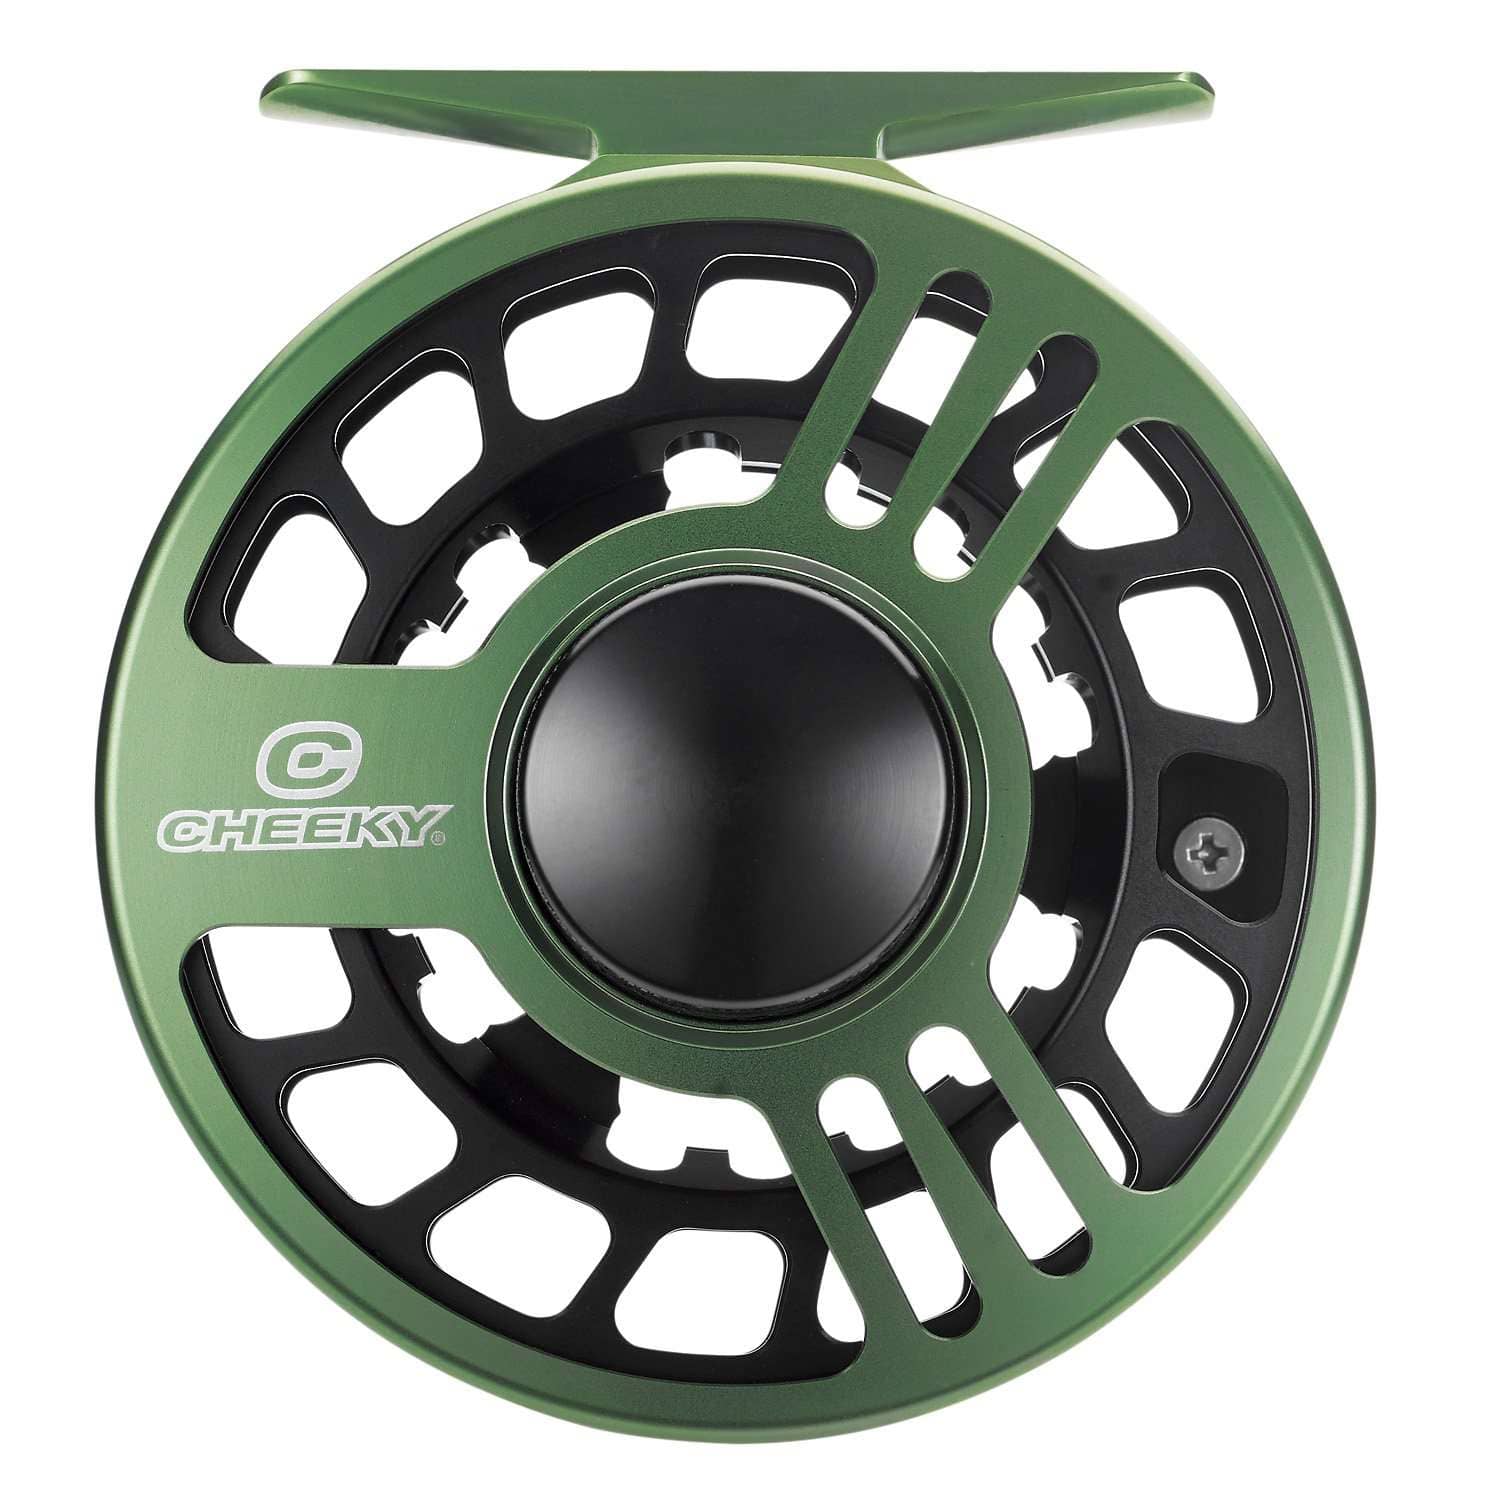 Buy Limitless Spare Spools Online - Cheeky Fishing